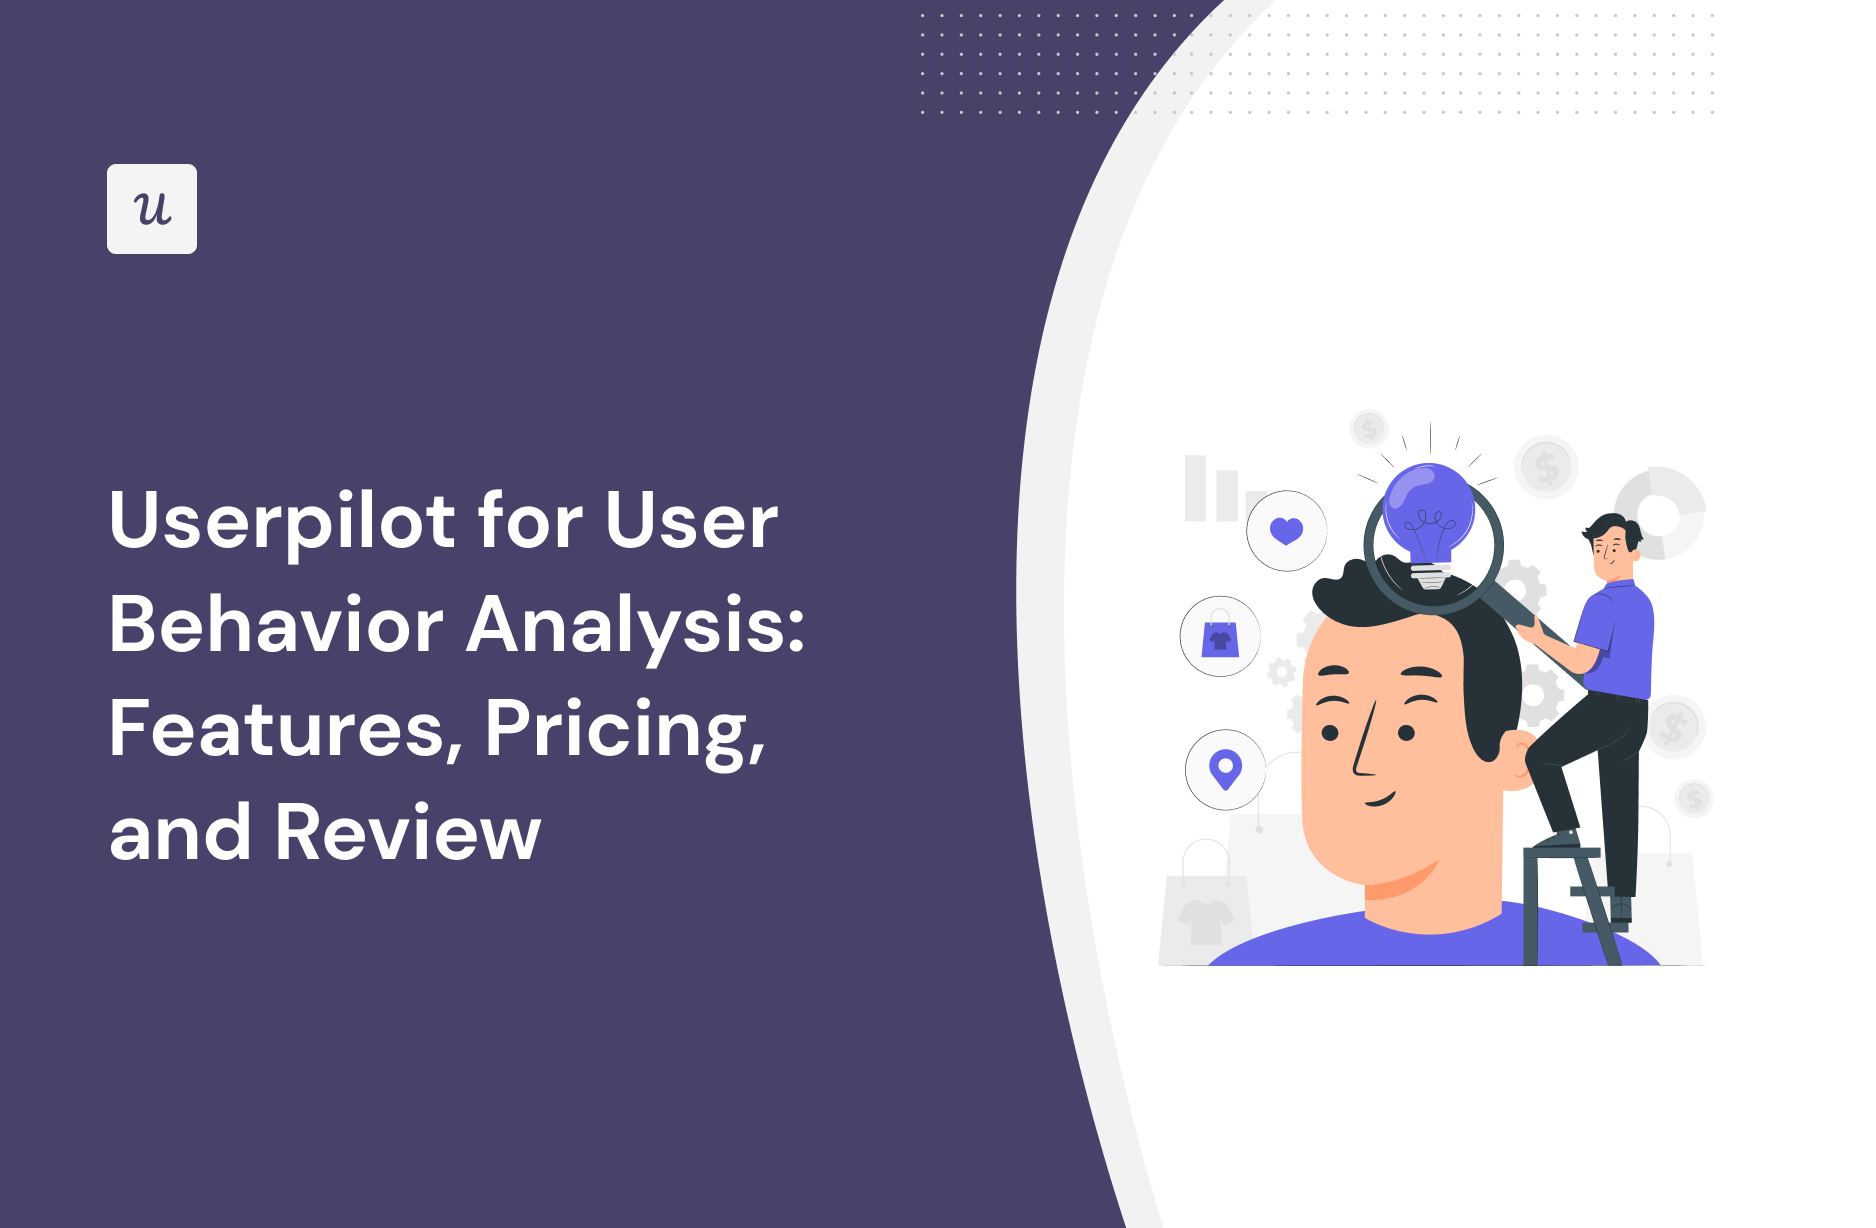 Userpilot for User Behavior Analysis: Features, Pricing, and Review